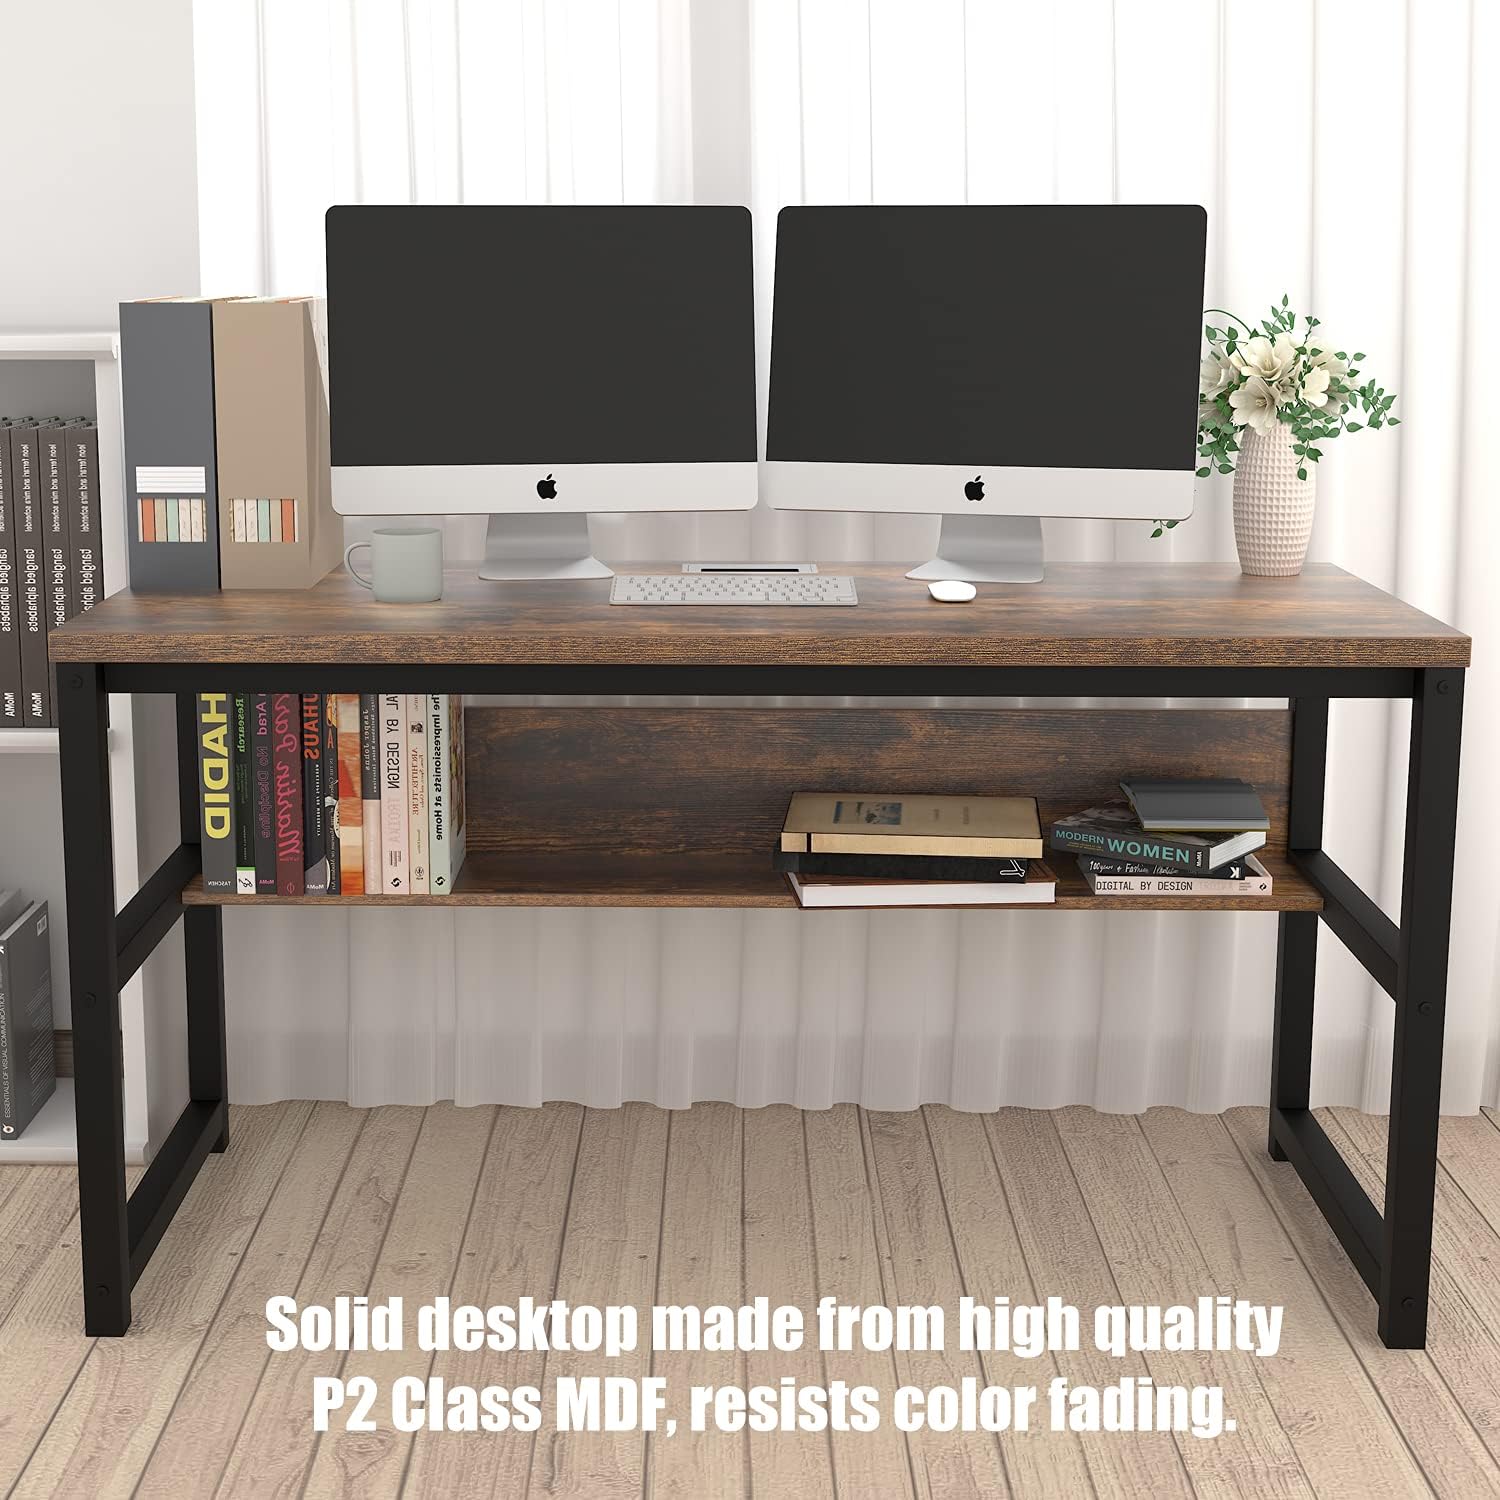 TOPSKY 55" Computer Desk with Bookshelf/Metal Hole Cable Cover 1.18" Thick Desk CT-8025